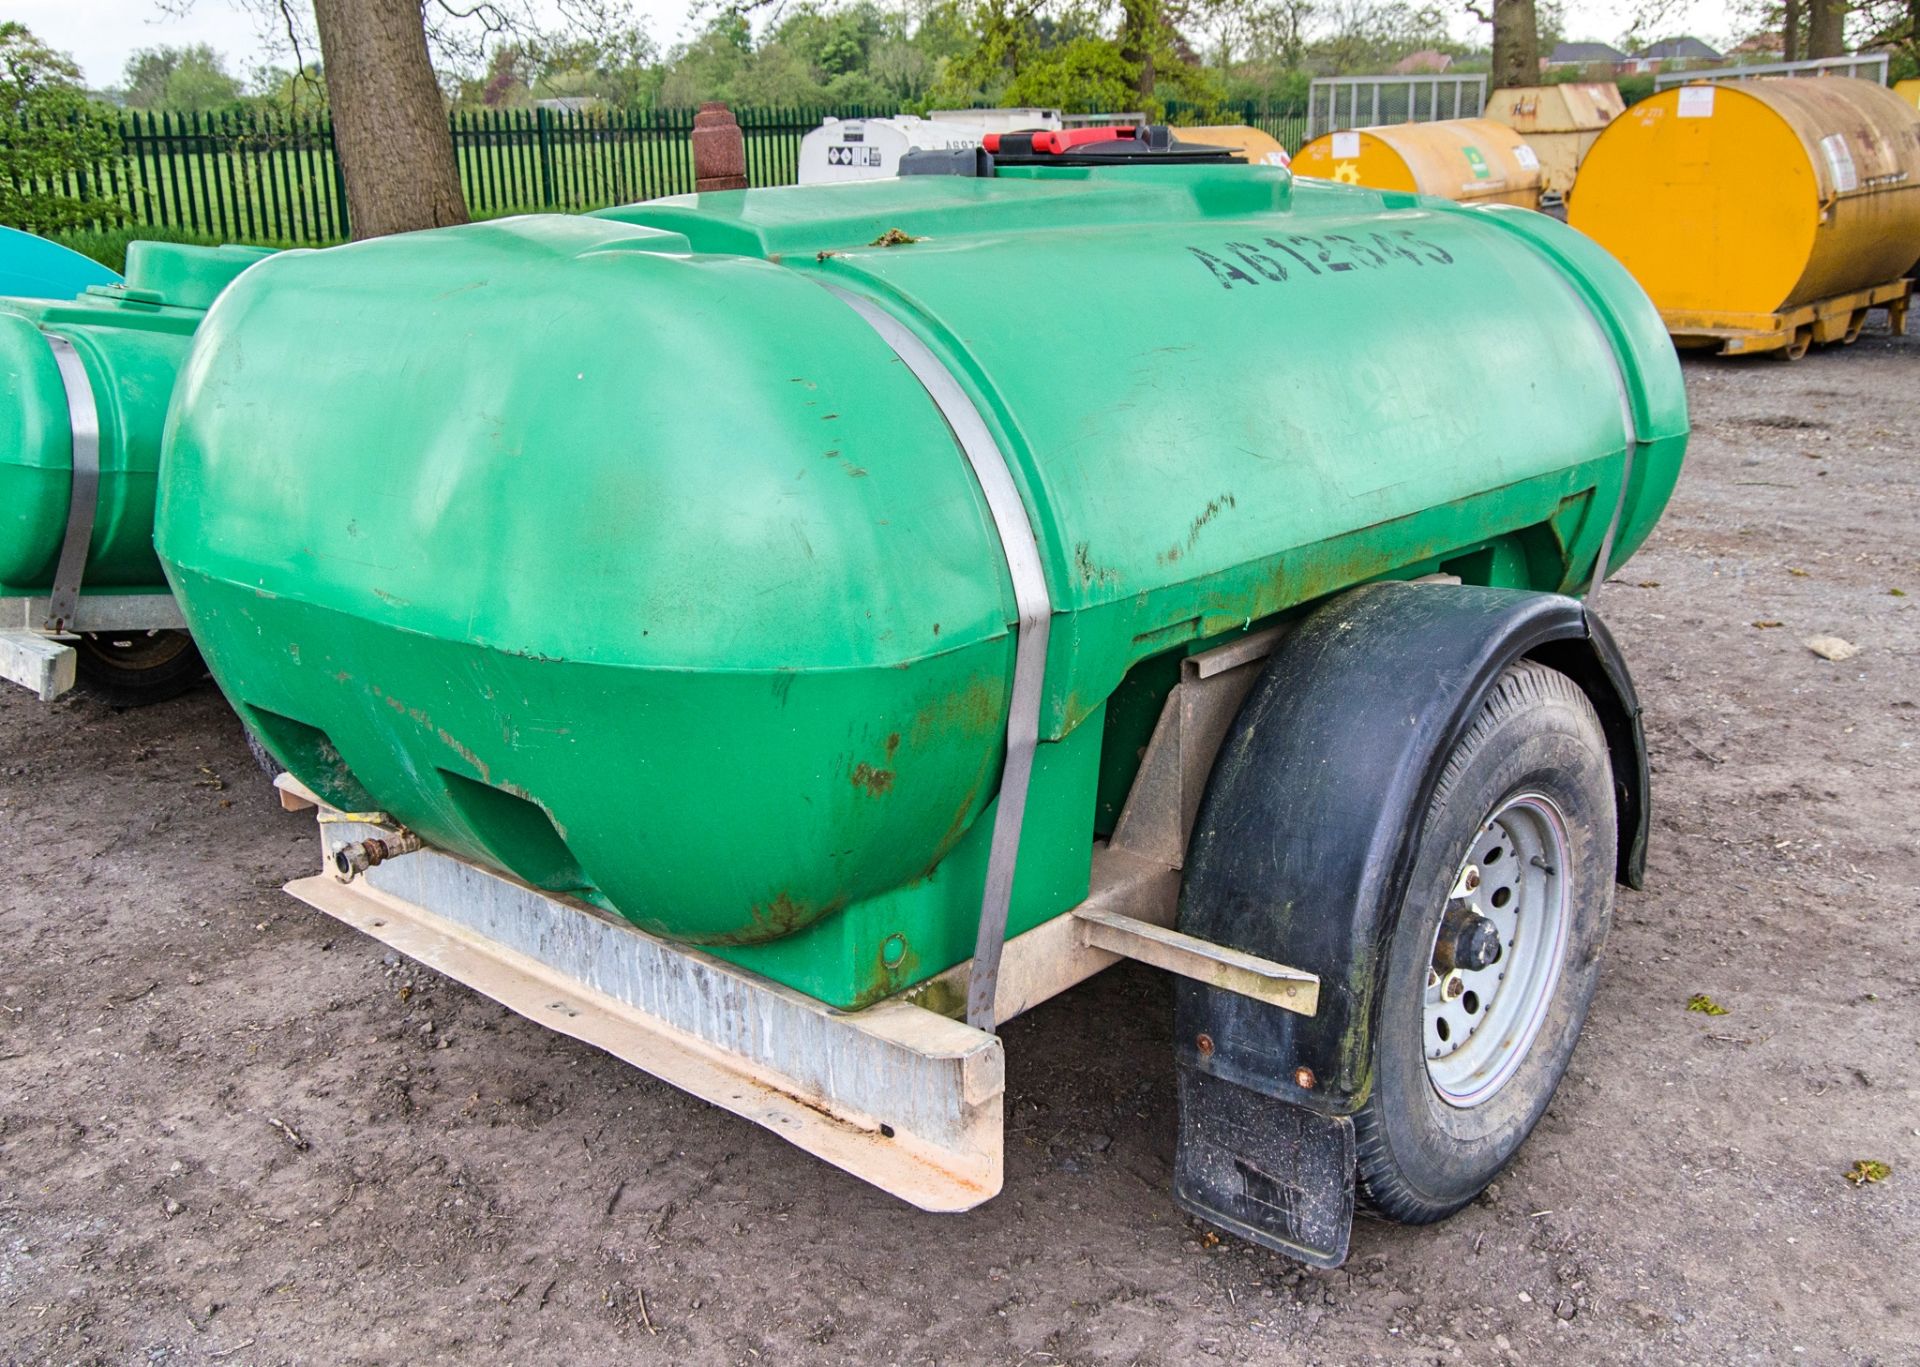 Trailer Engineering 2000 litre fast tow mobile water bowser A612645 - Image 3 of 6